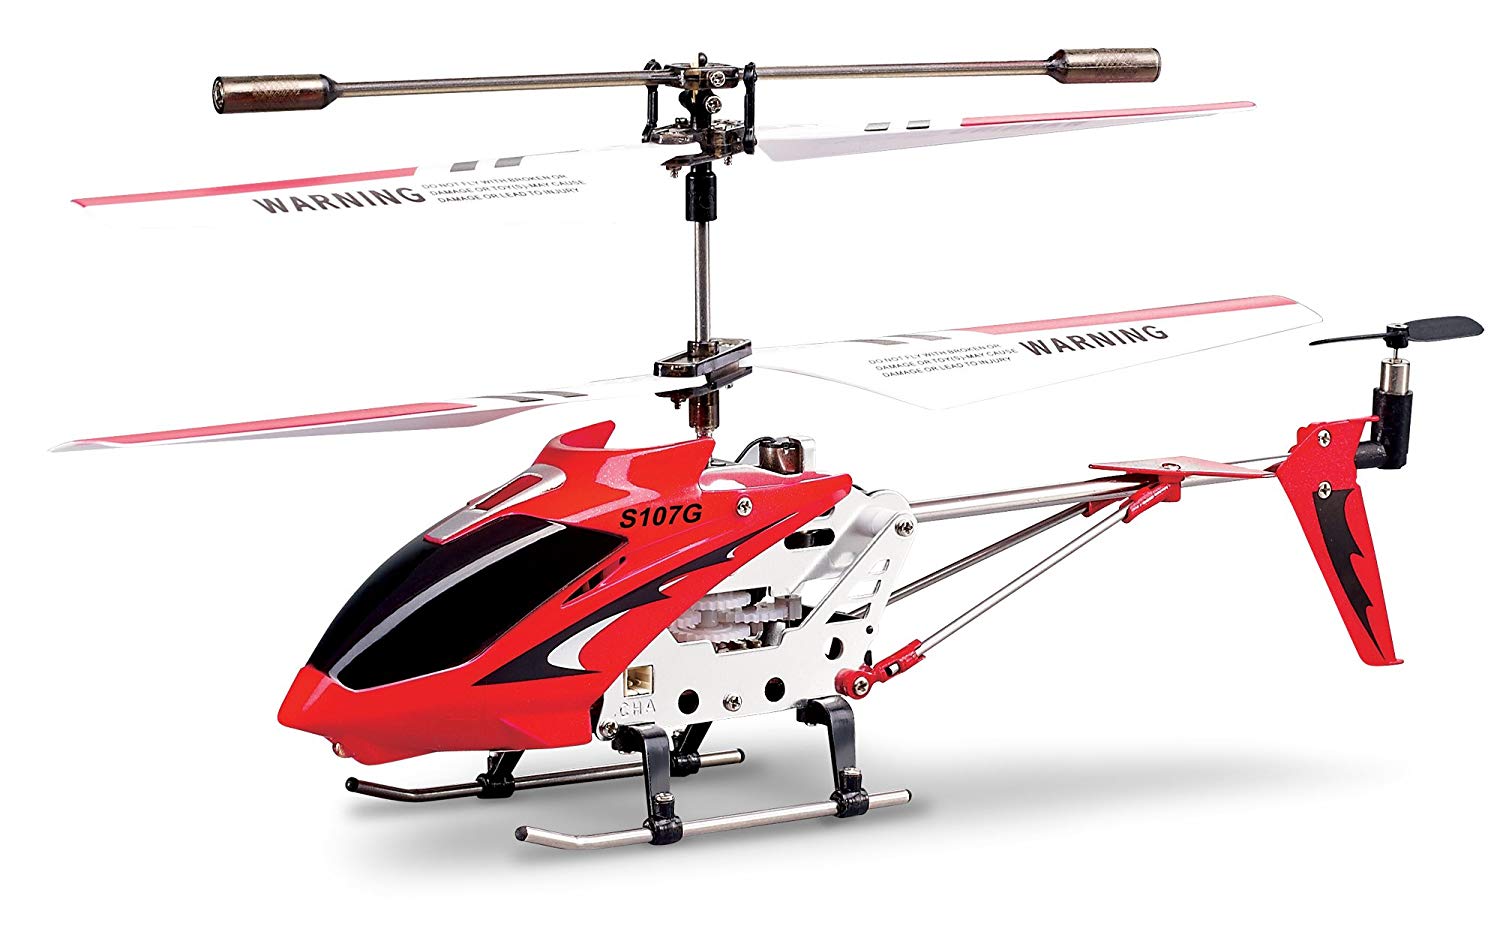 Syma S107/S107G 3 Channel RC Helicopter with Gyro - Red - image 1 of 1